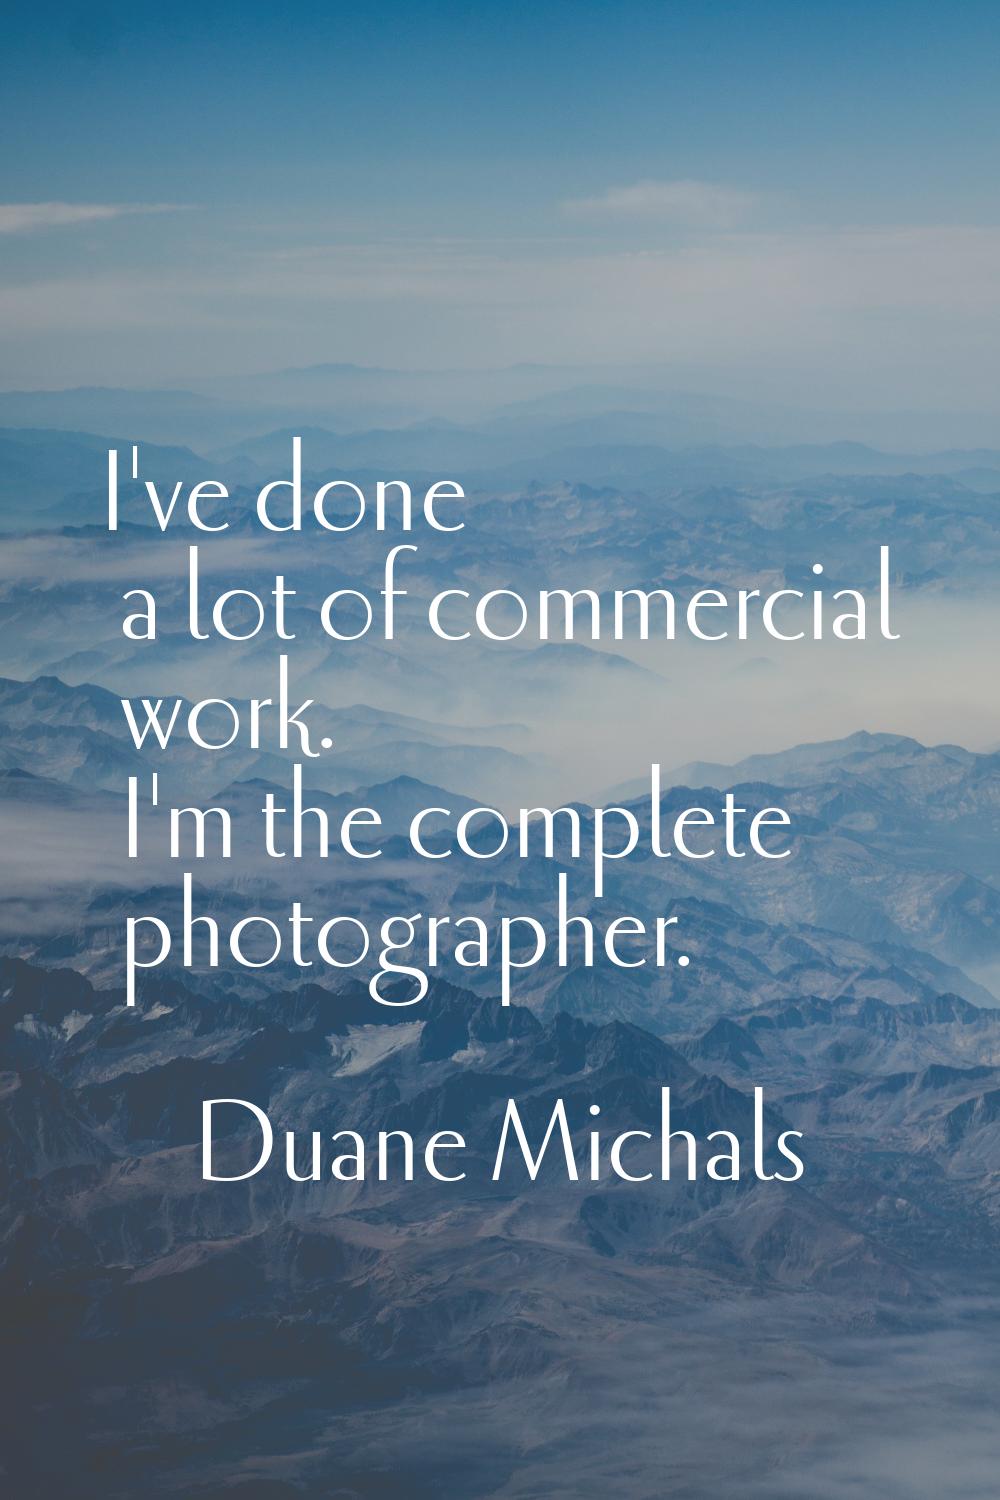 I've done a lot of commercial work. I'm the complete photographer.